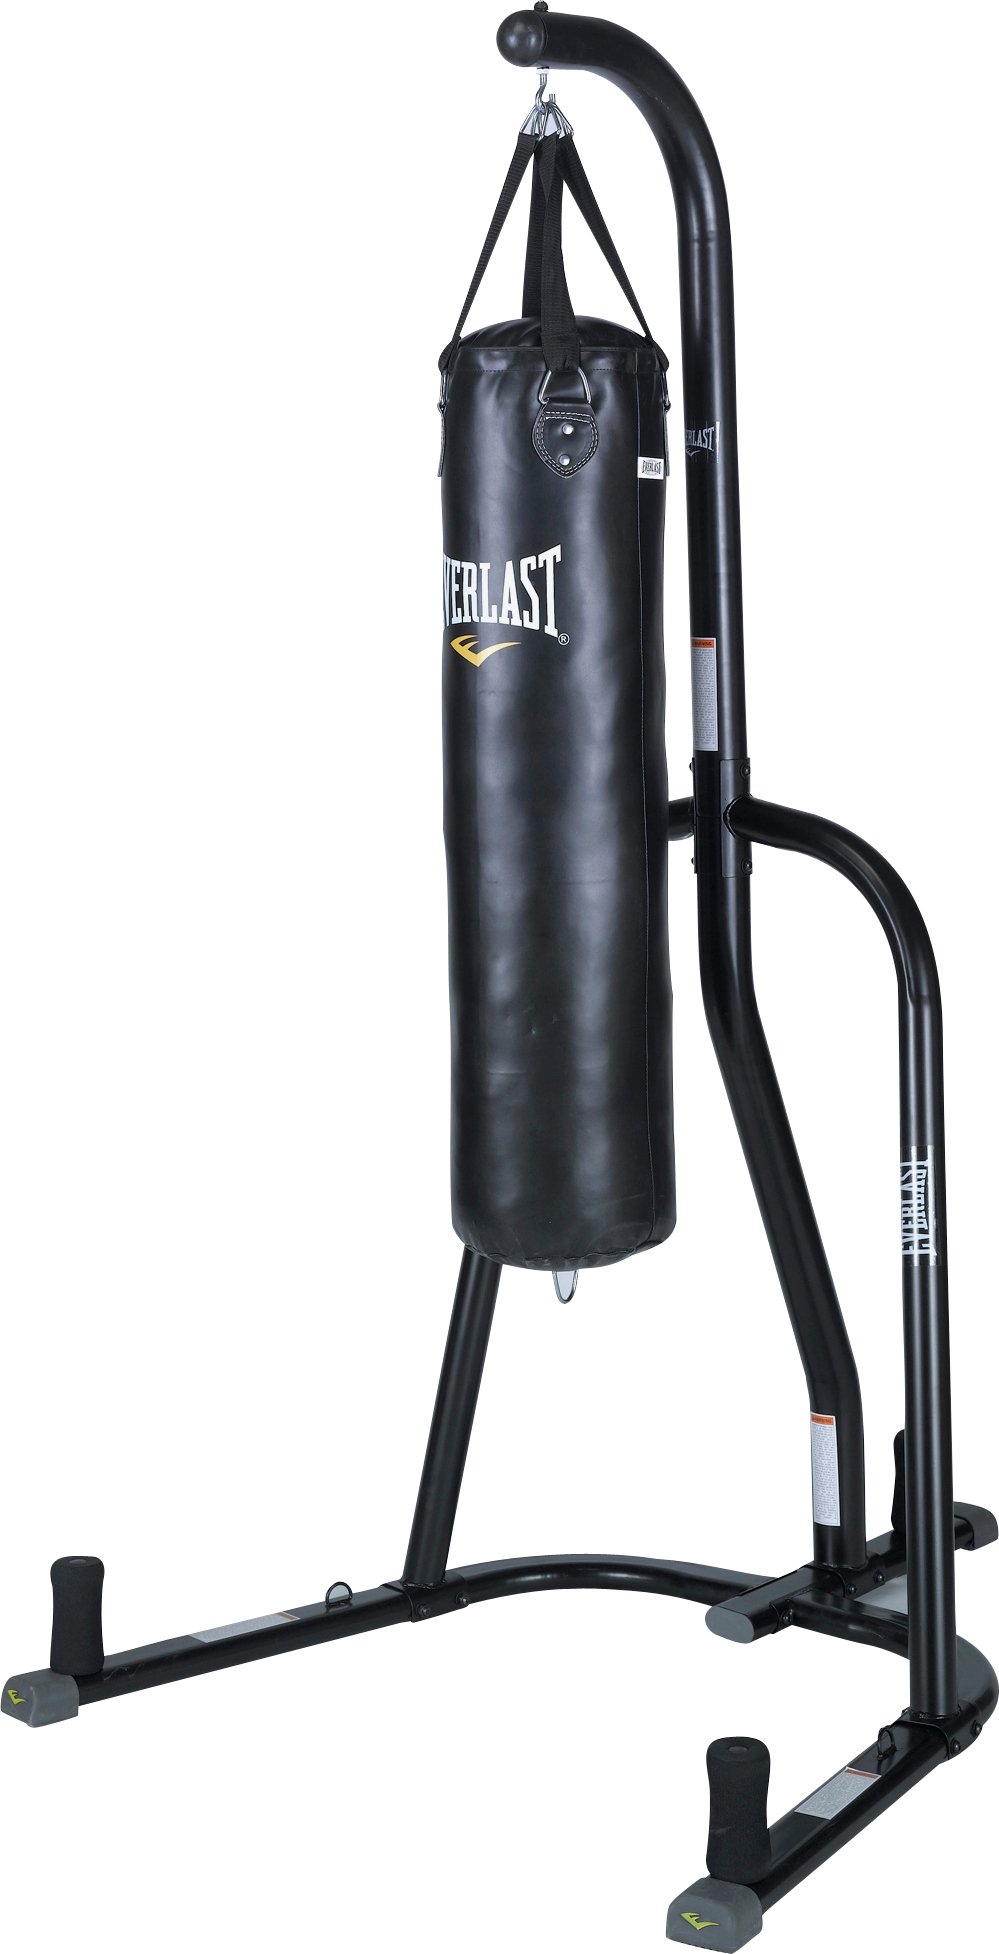 SALE on Everlast Boxing Heavy Punch Bag Stand - Everlast. Now Available our Best Price on Everlast